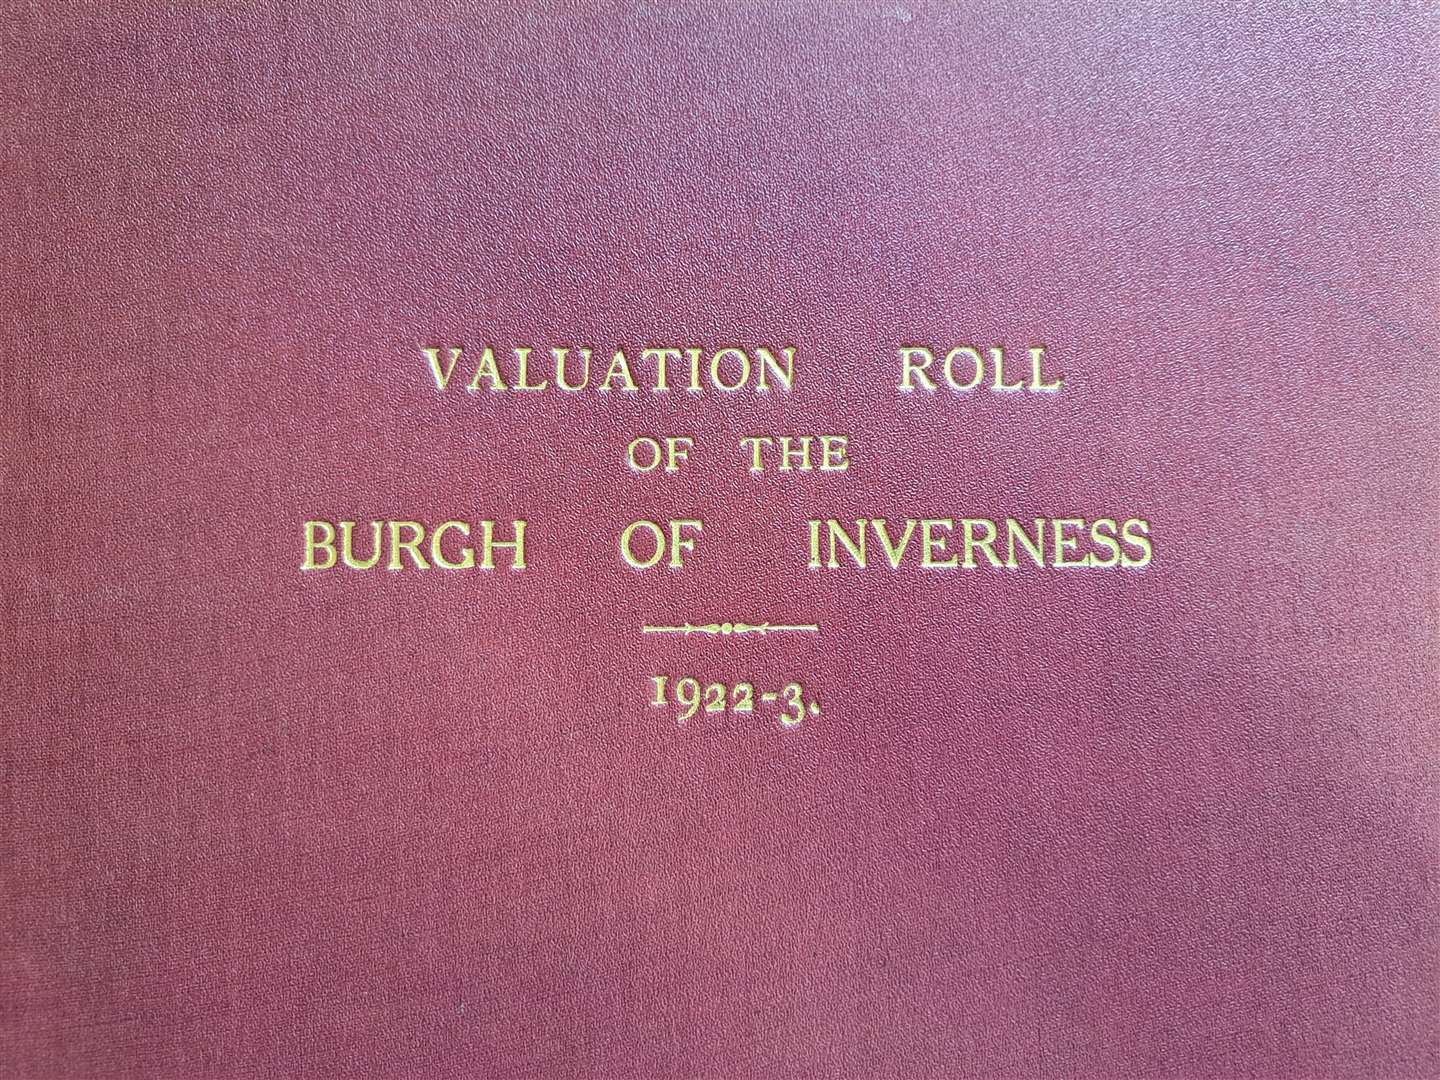 1922/23 valuation roll cover.